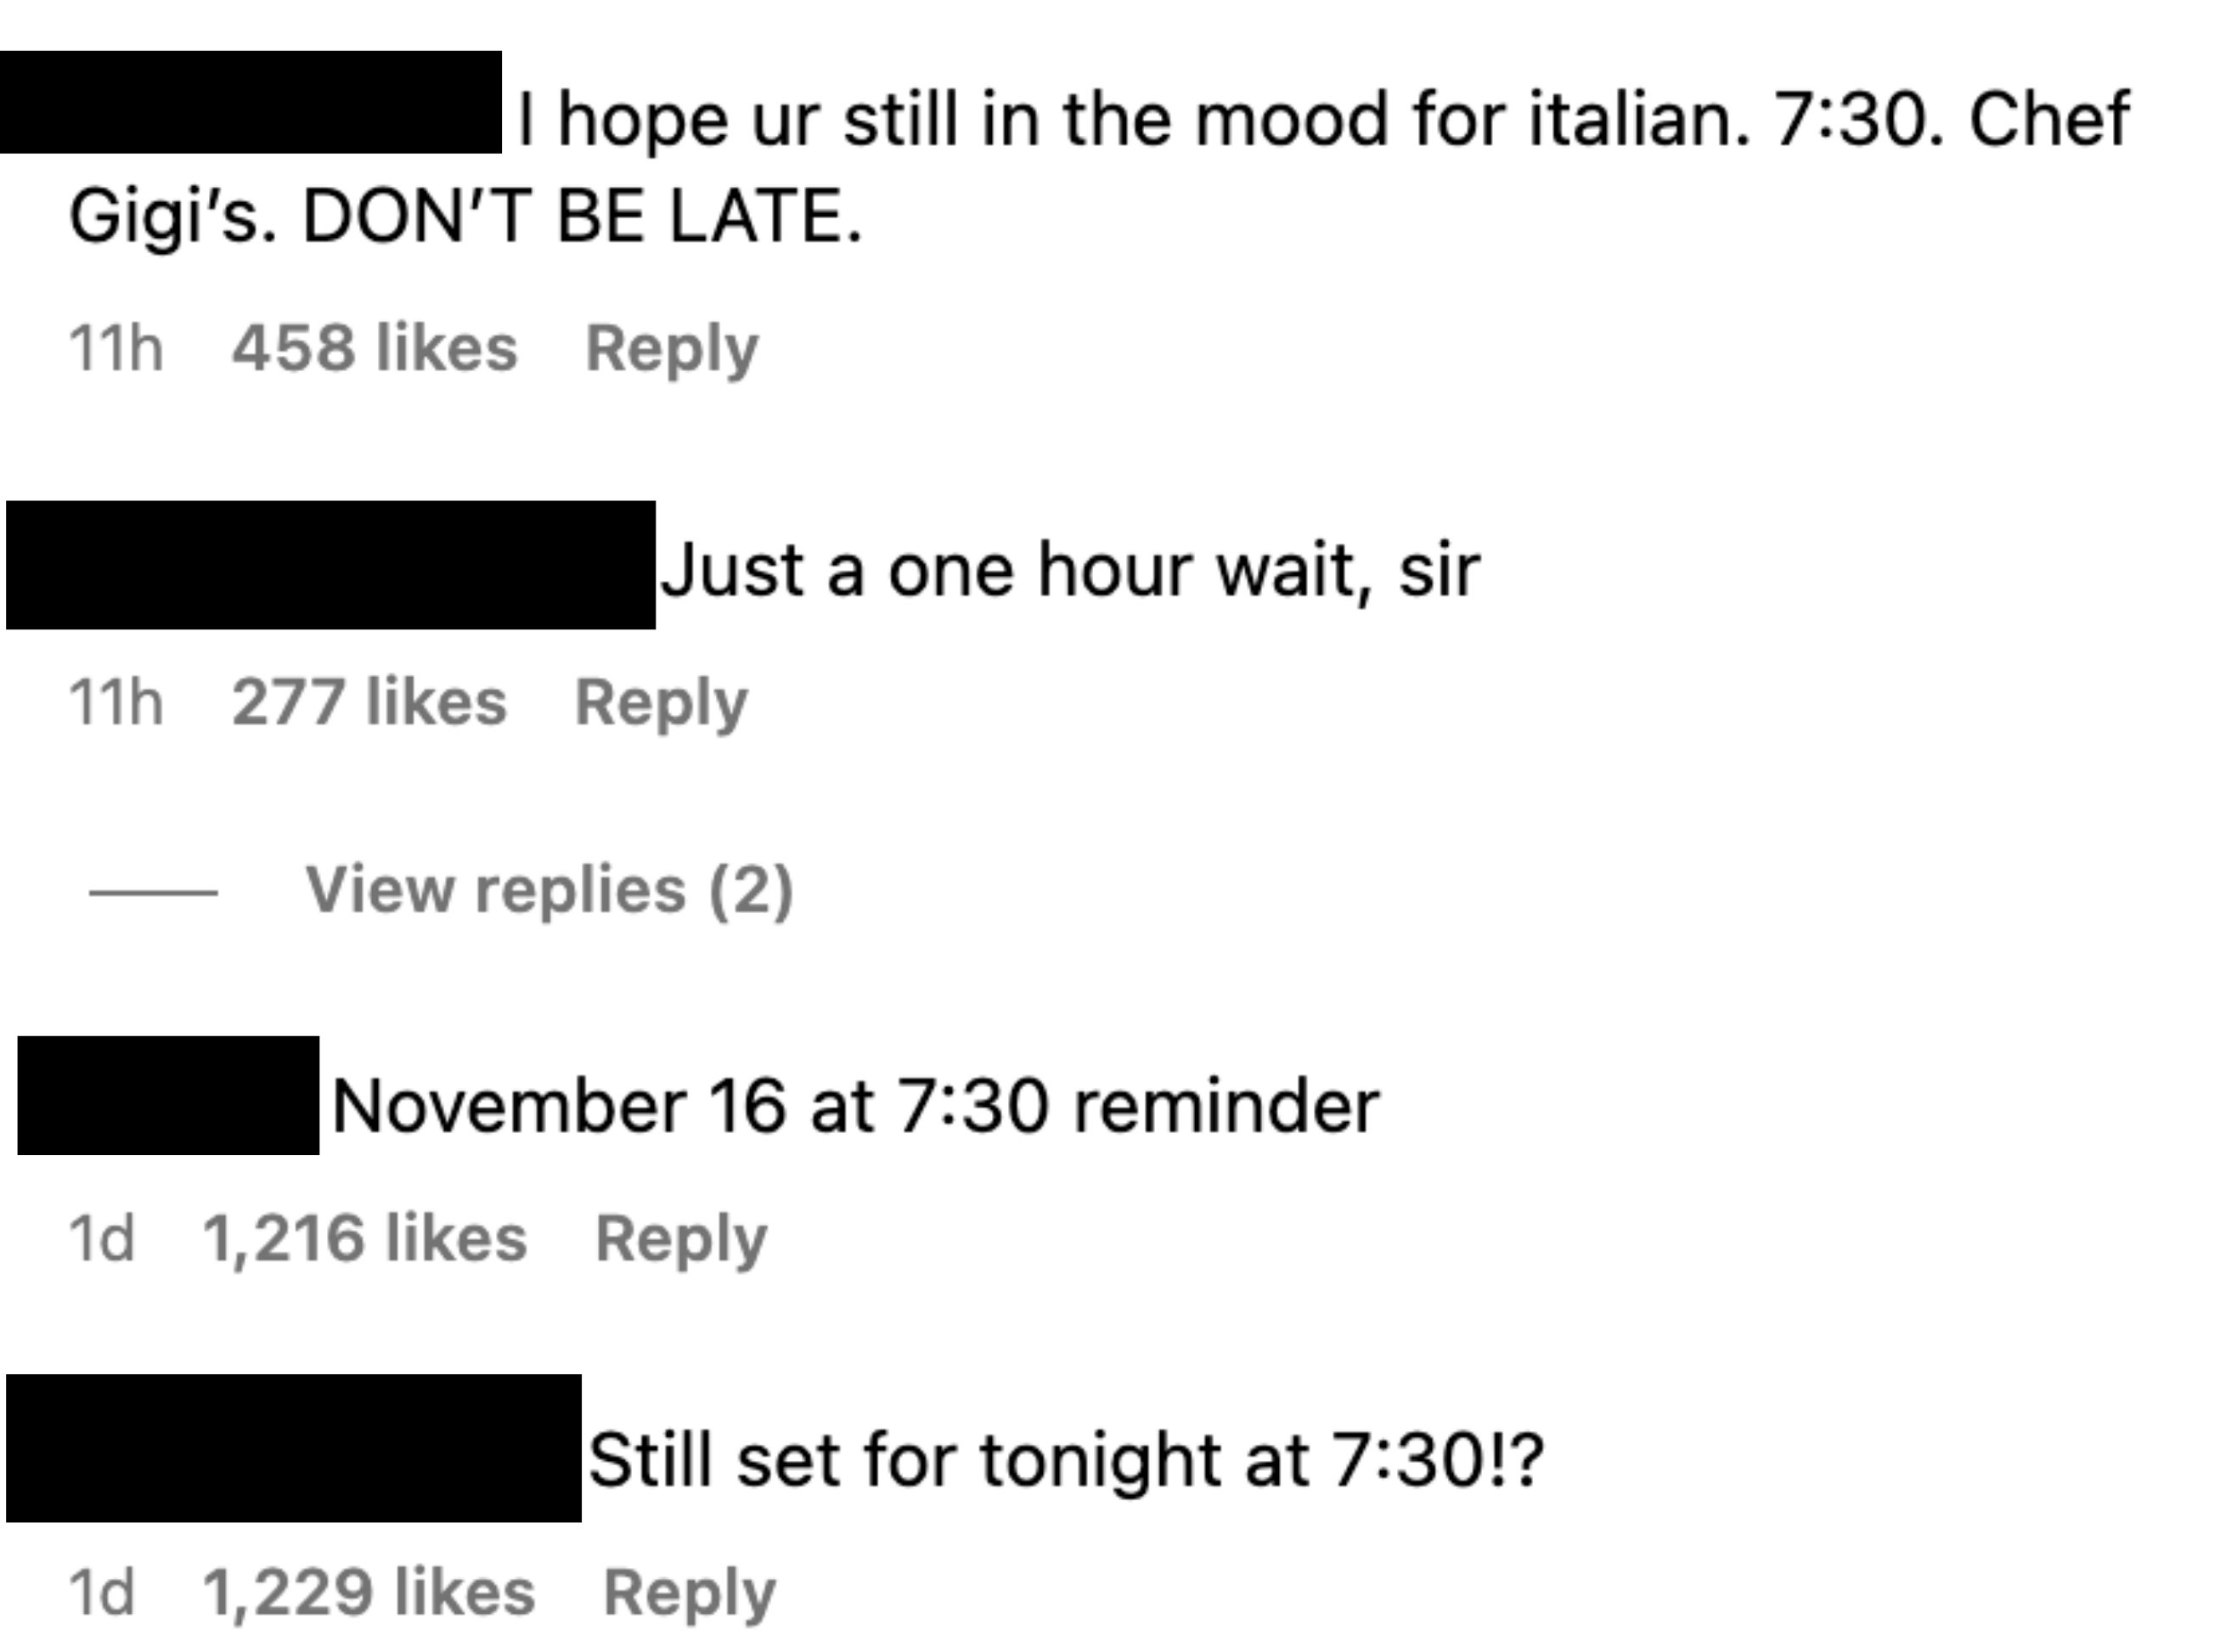 Other comments: &quot;Just a one hour wait, sir,&quot; &quot;November 16 at 7:30 reminder,&quot; and &quot;Still set for tonight at 7:30!?&quot;